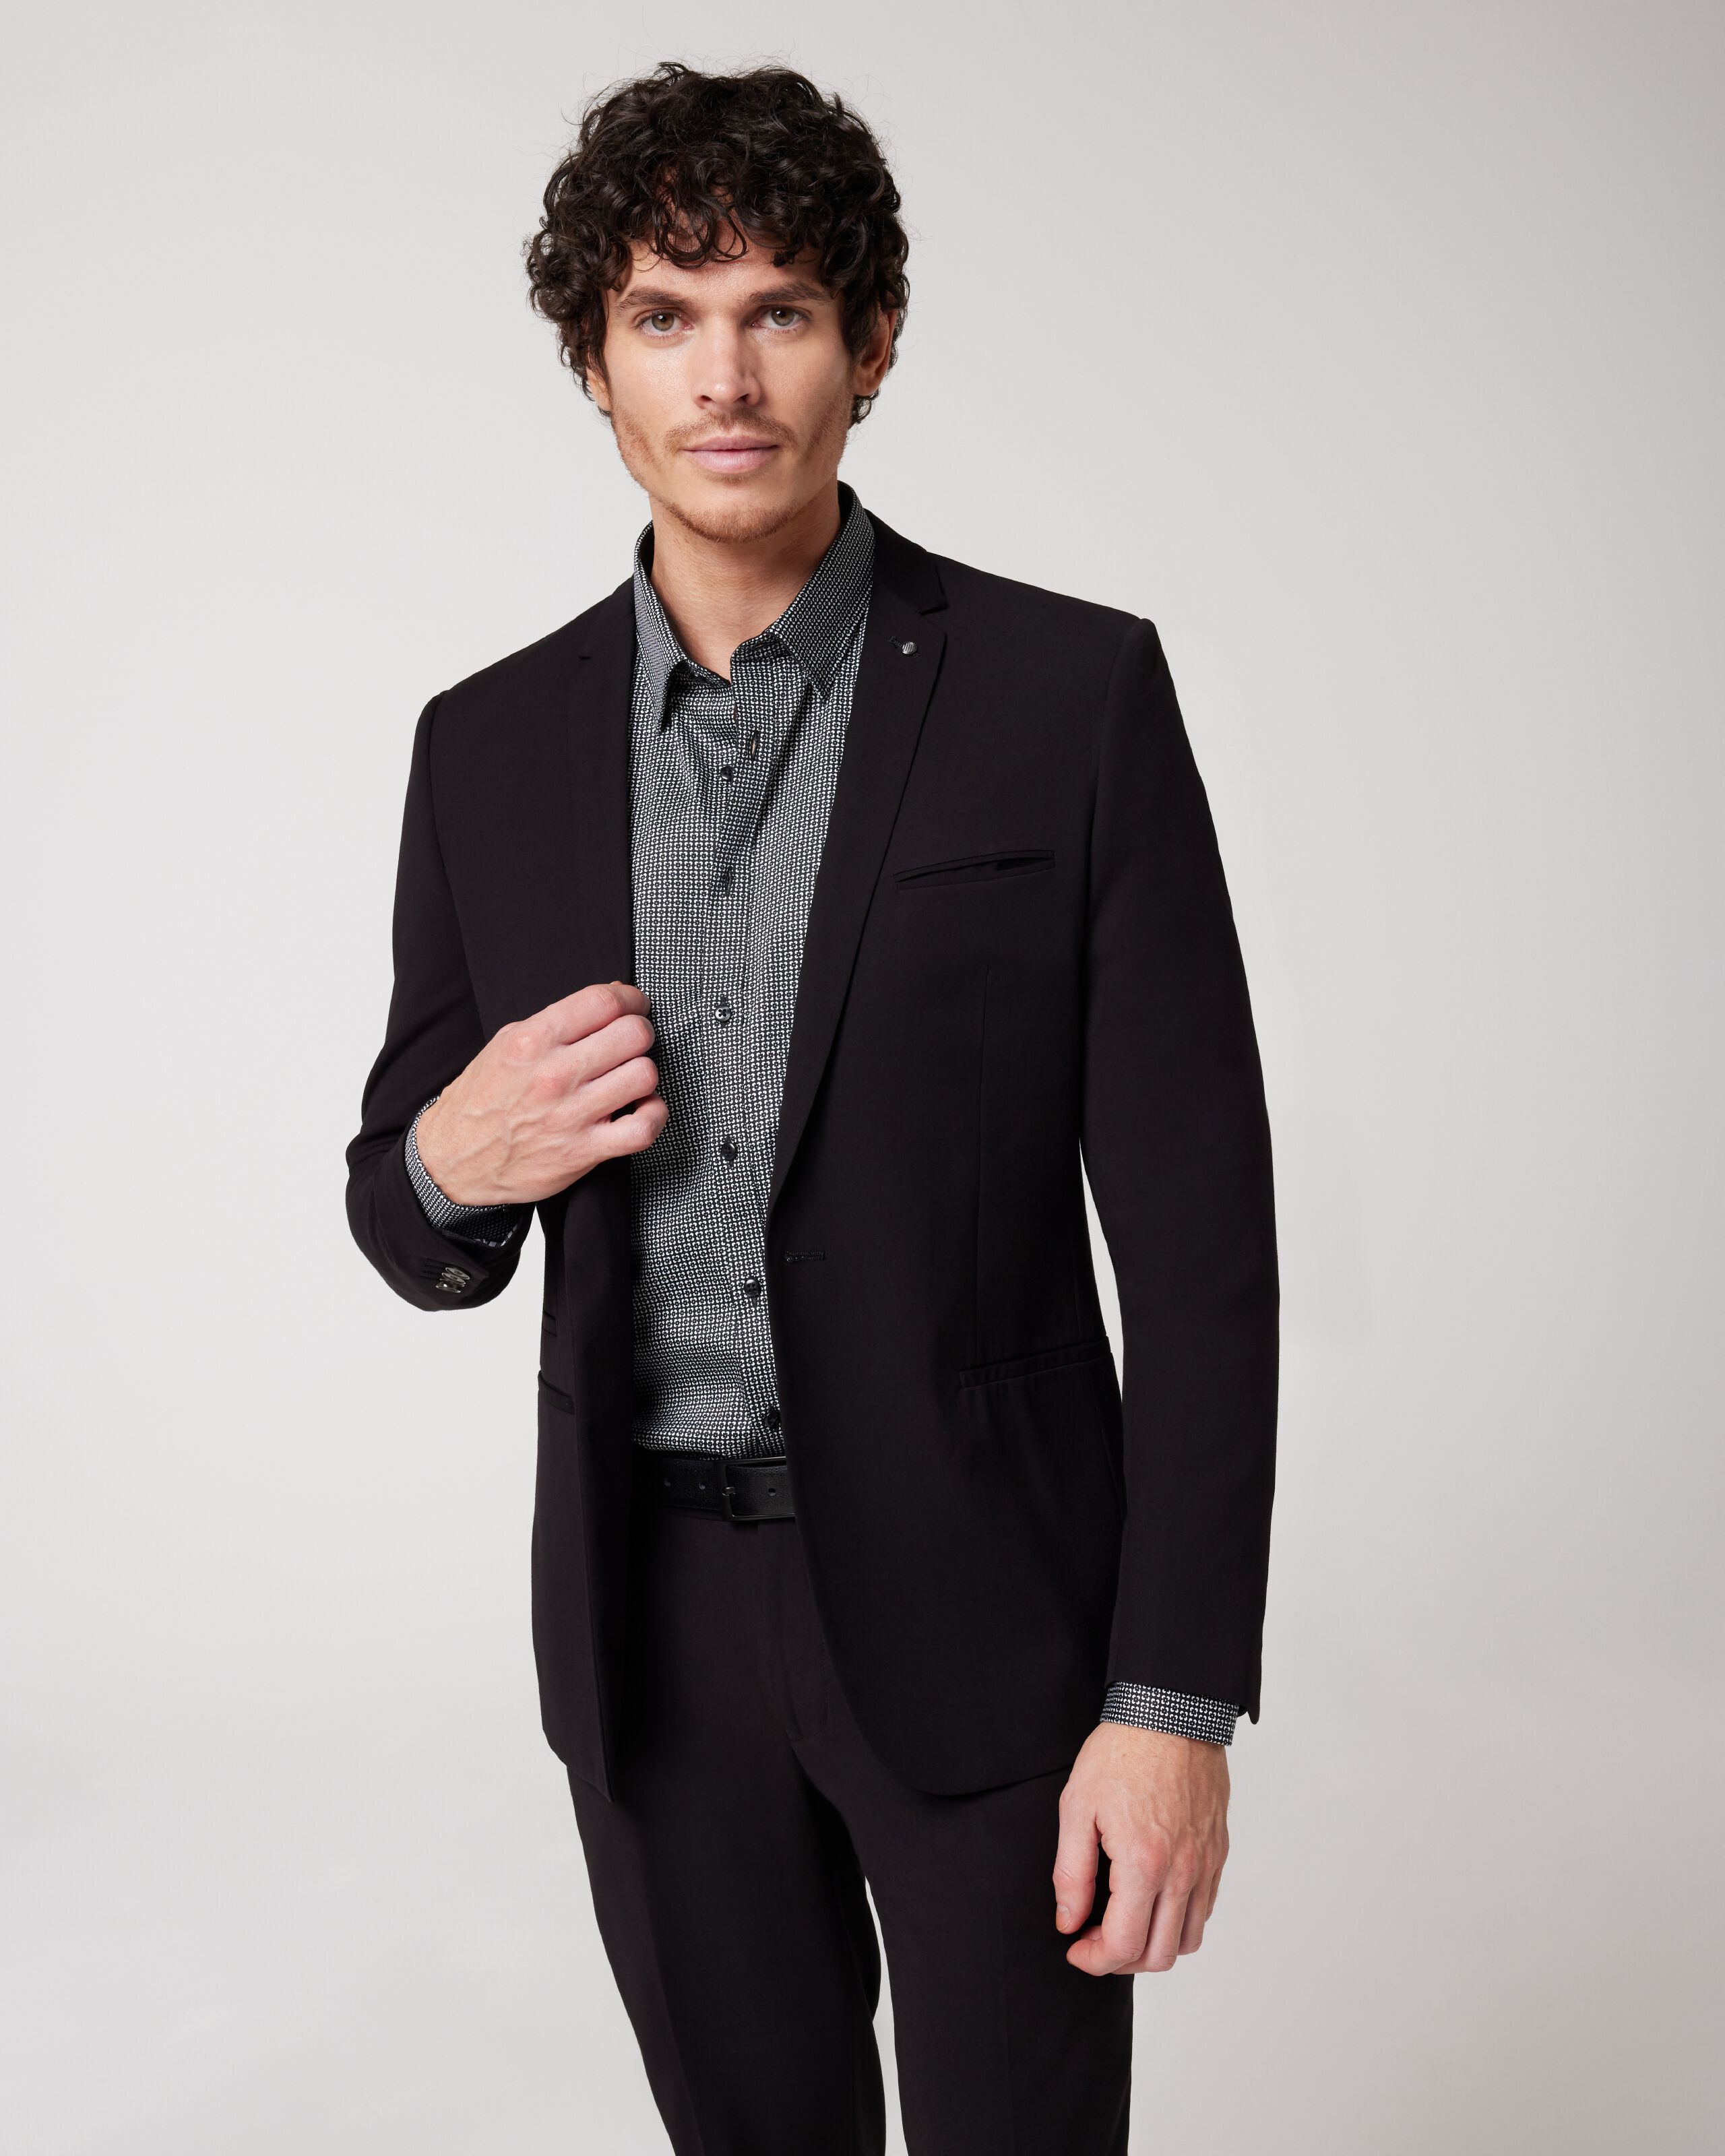 Black Suit with Grey Shirt | Hockerty